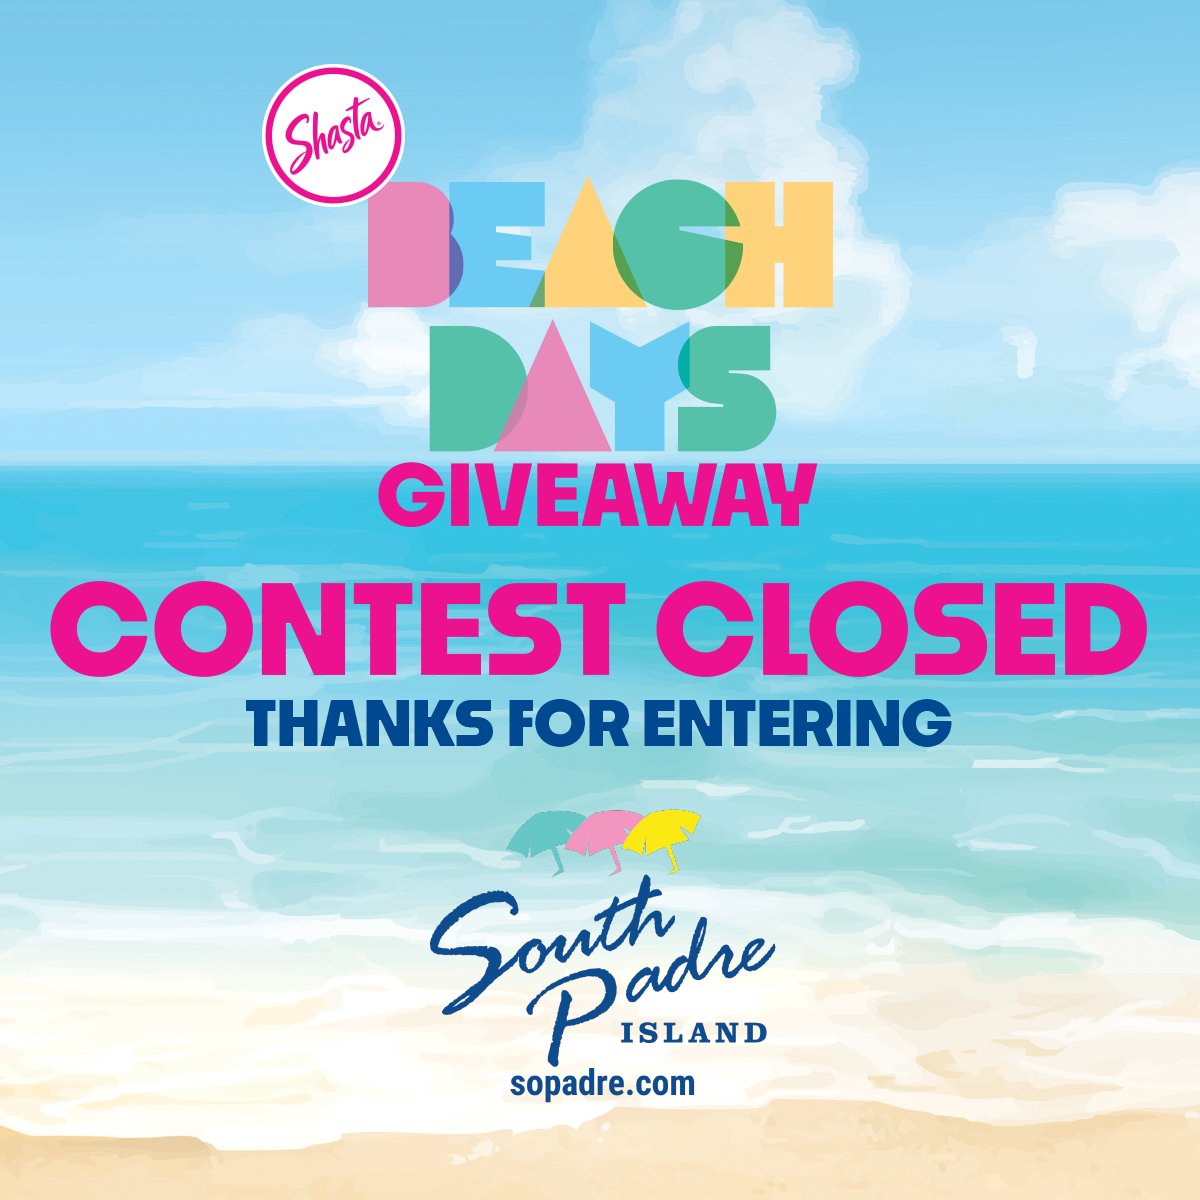 The Shasta Beach Days Giveaway is NOW CLOSED. 🏖️ We will verify and contact the winner via email submitted through the sweepstakes form. 

Thank you to everyone who participated in the Shasta Beach Days Giveaway! ☀️

#ShastaBeachDays #SoPadre #TexasBestBeach⁠